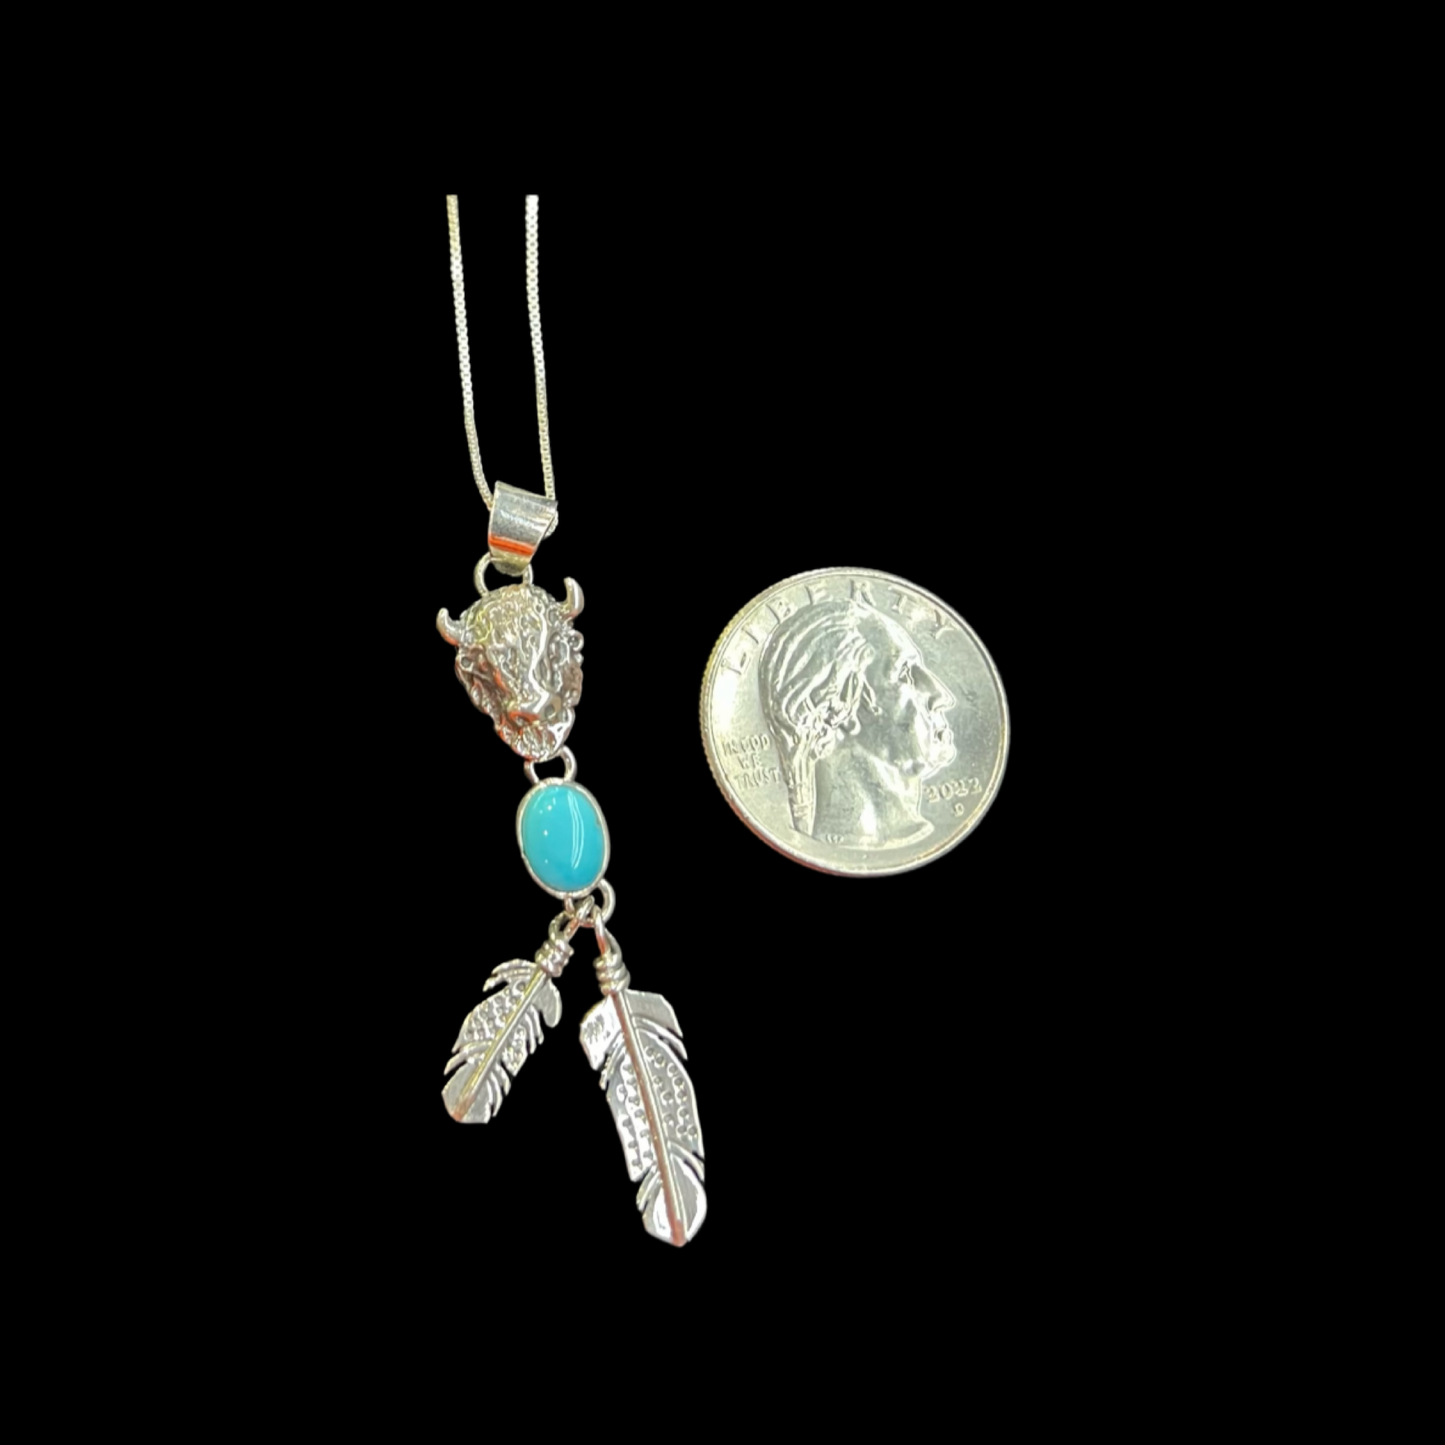 Sleeping Beauty Turquoise Pendant with Feathers and Buffalo Necklace